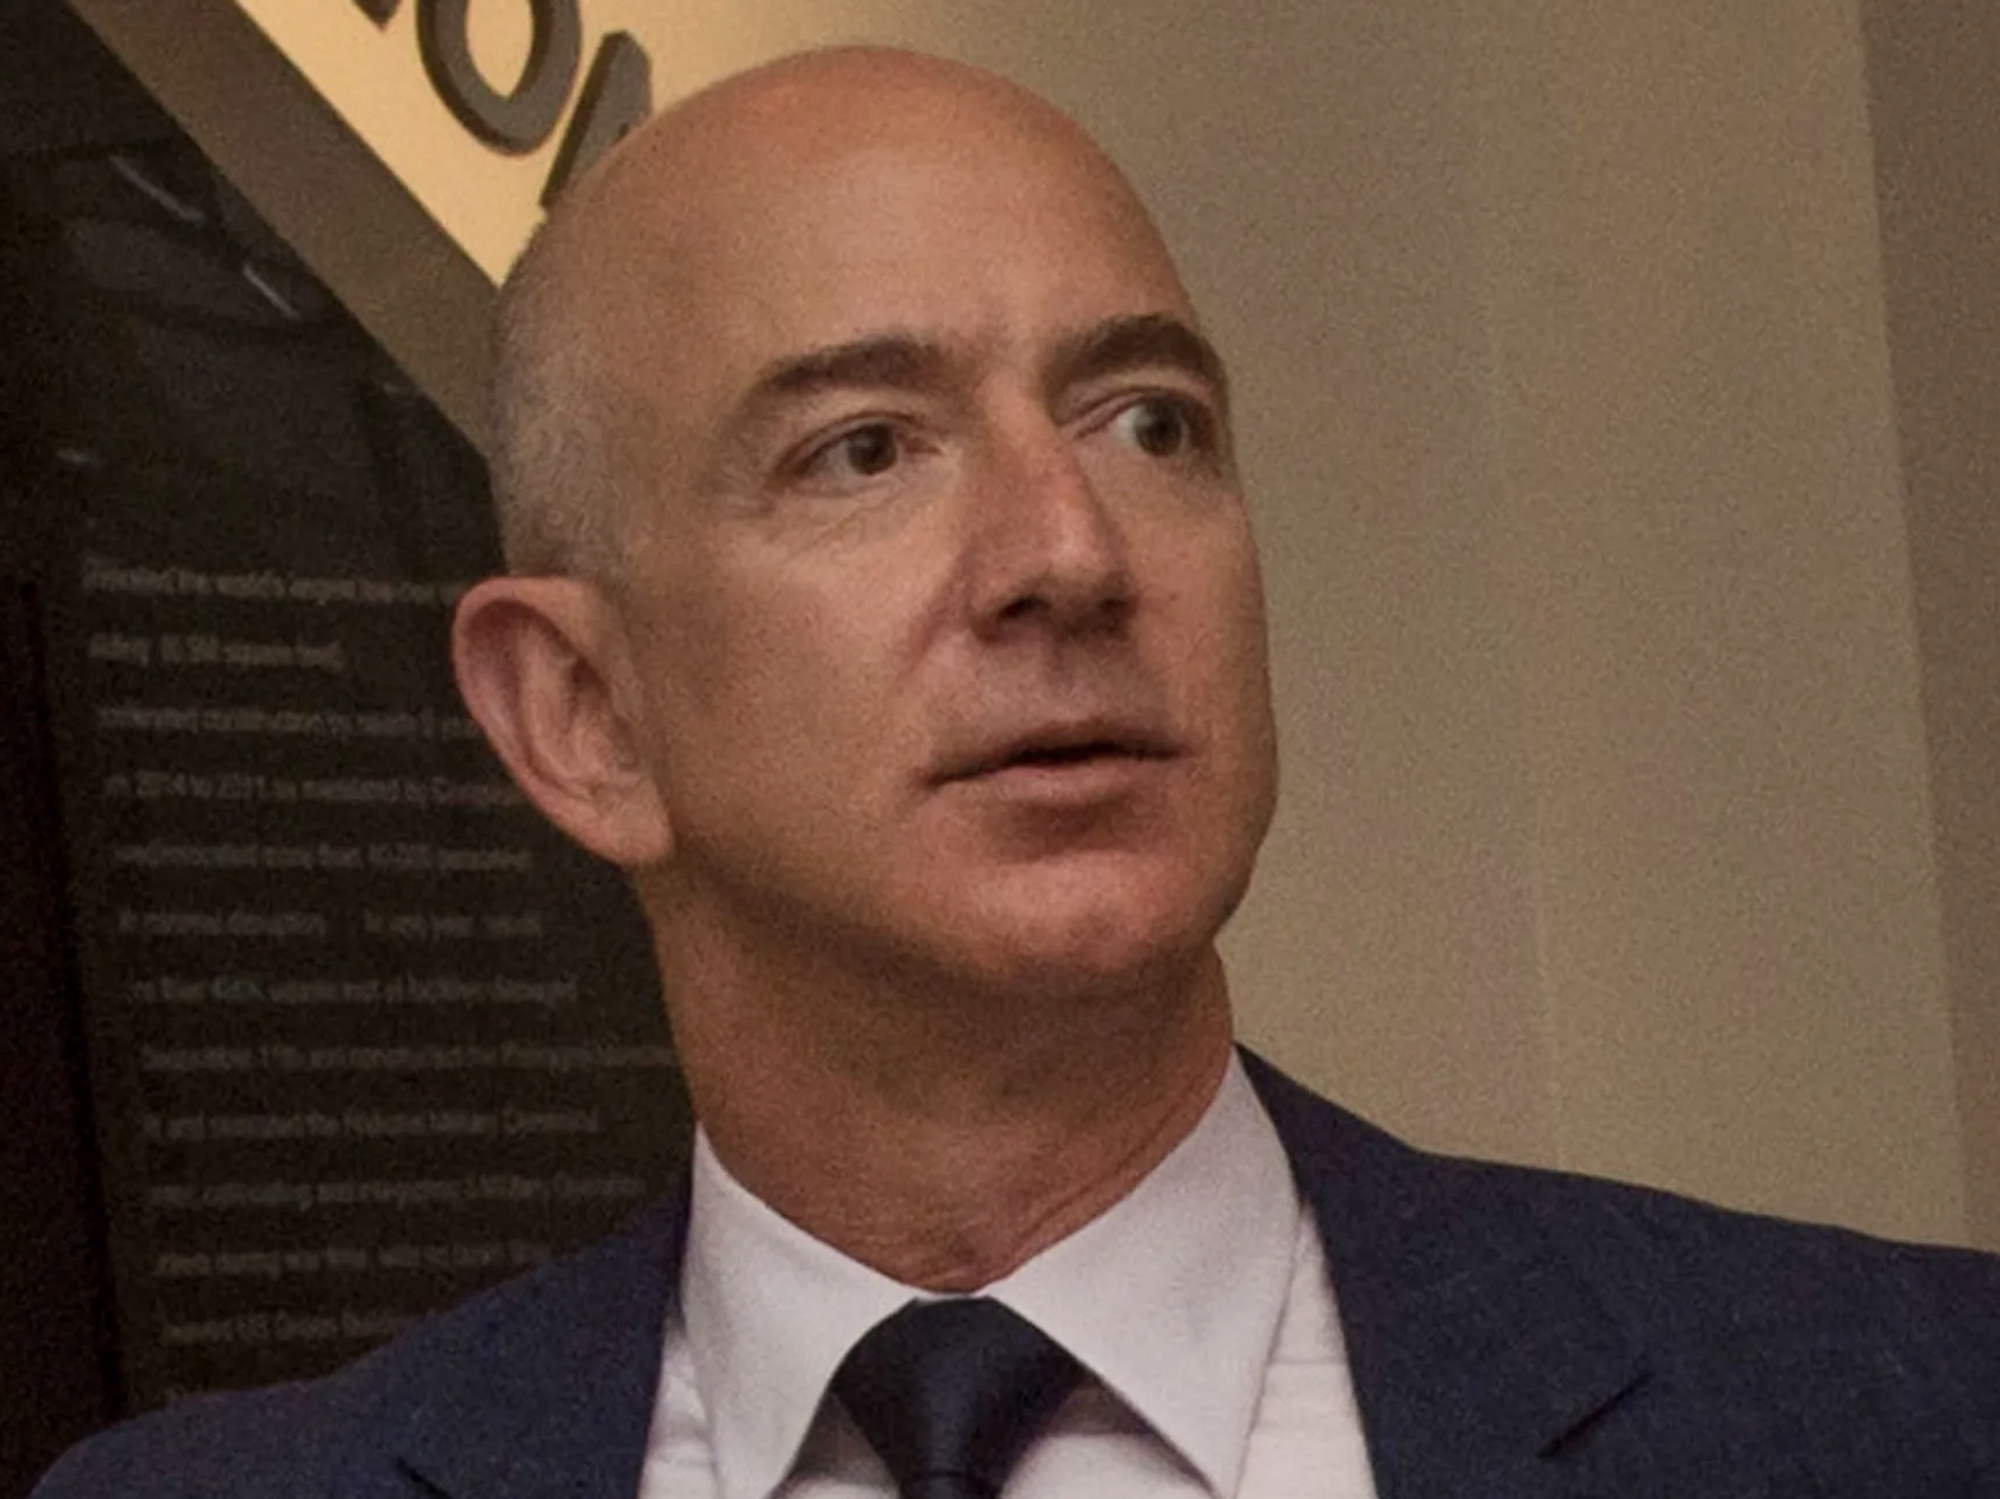 Jeff Bezos Says He’s Being Extorted in Response to Defamation Suit